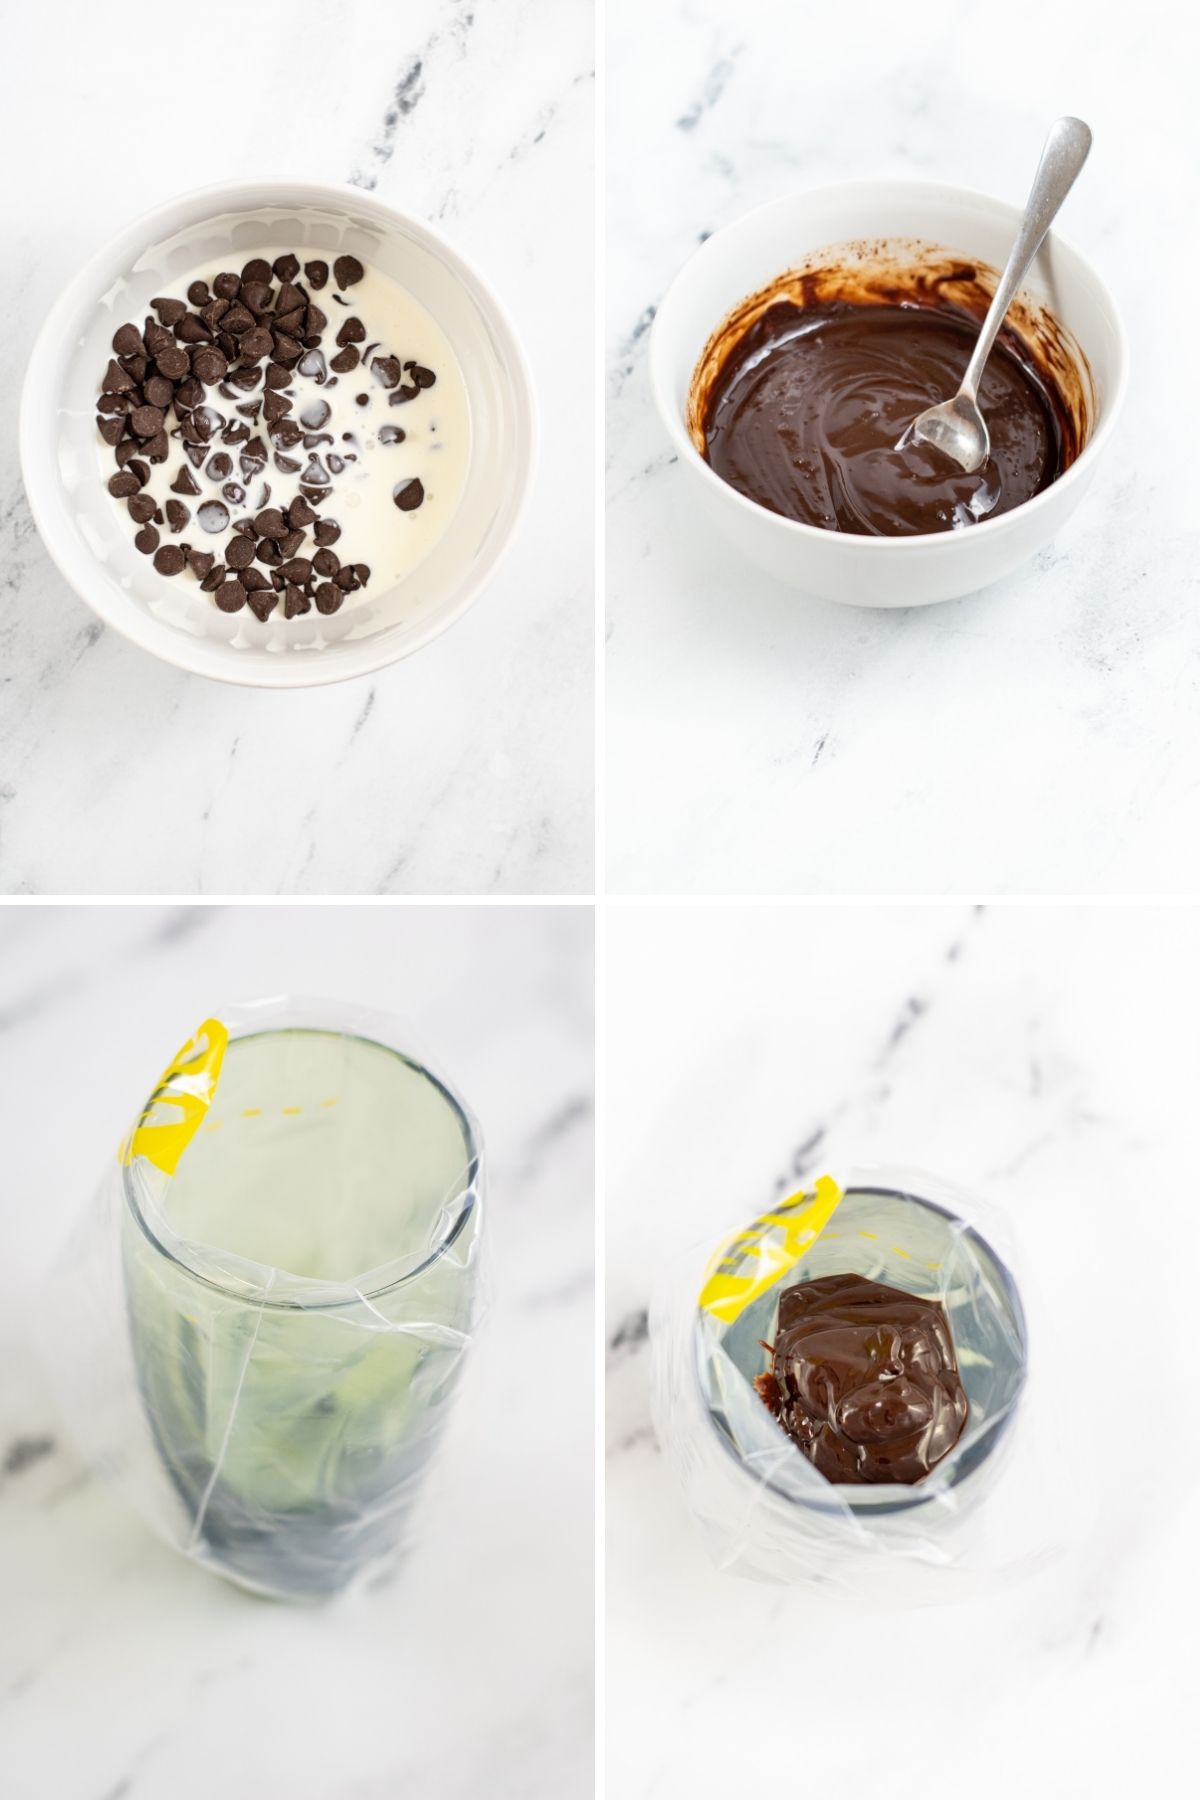 four steps: chocolate chips and cream in bowl, melted and spoon stirring it together; glass with zip top baggie in it; melted chocolate inside zip top baggie